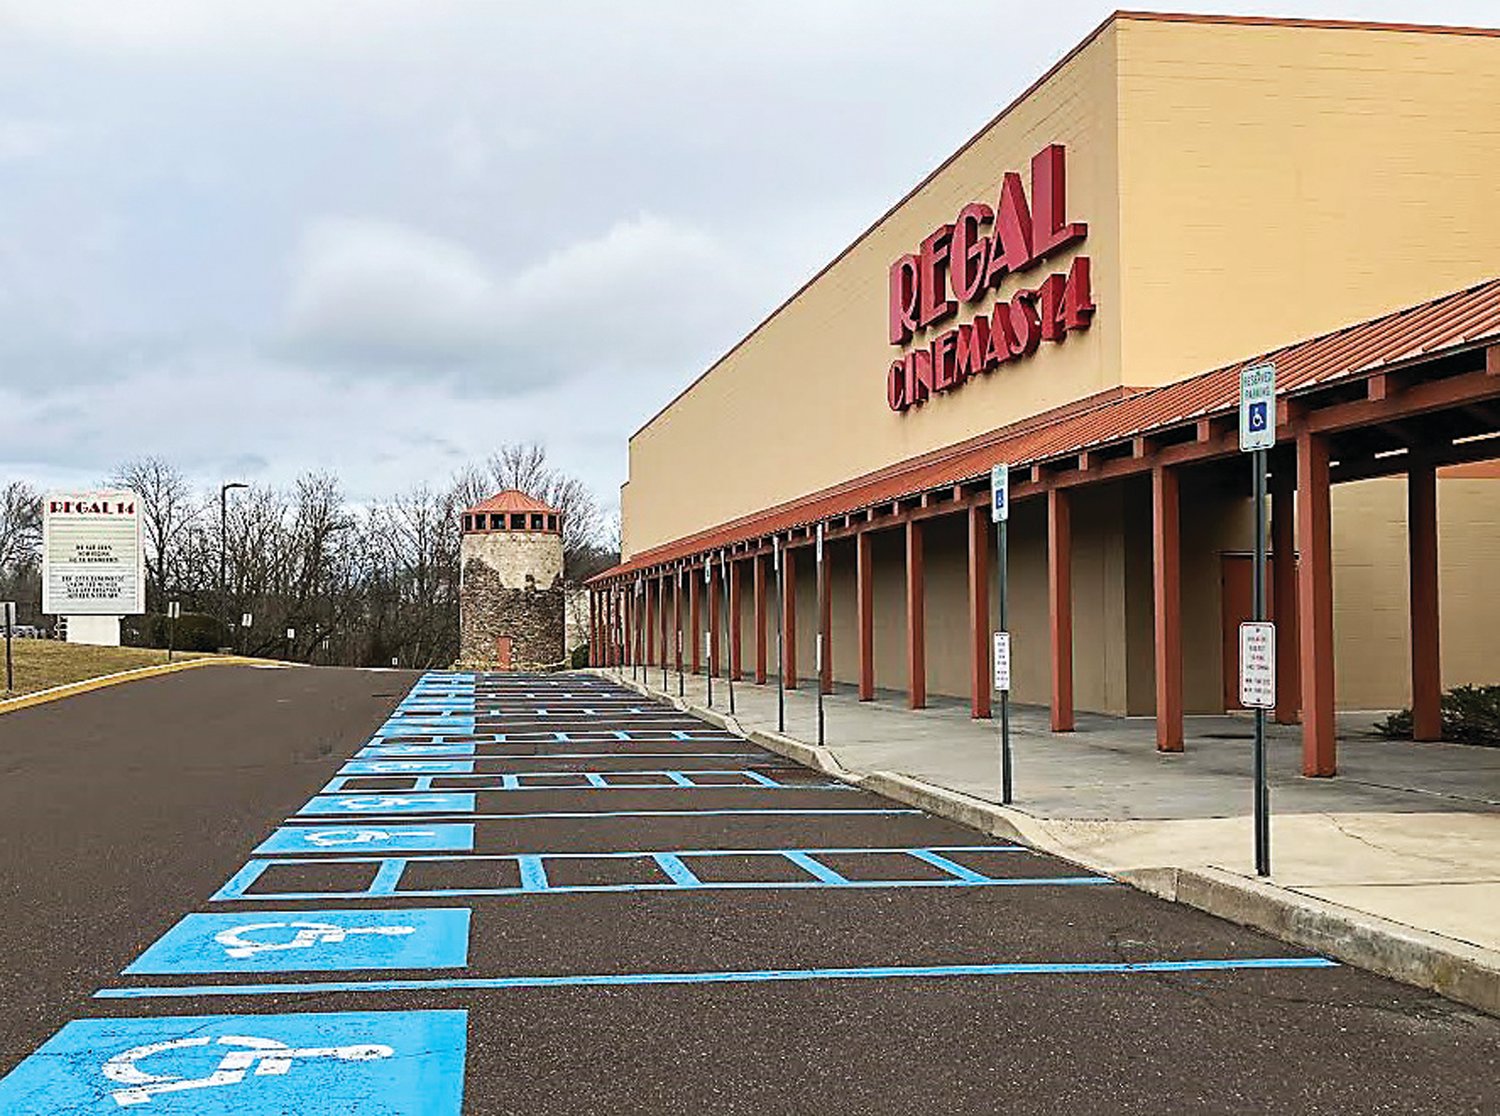 The Regal Barn Cinema in Doylestown Township closes its doors for the last time on Feb. 9.